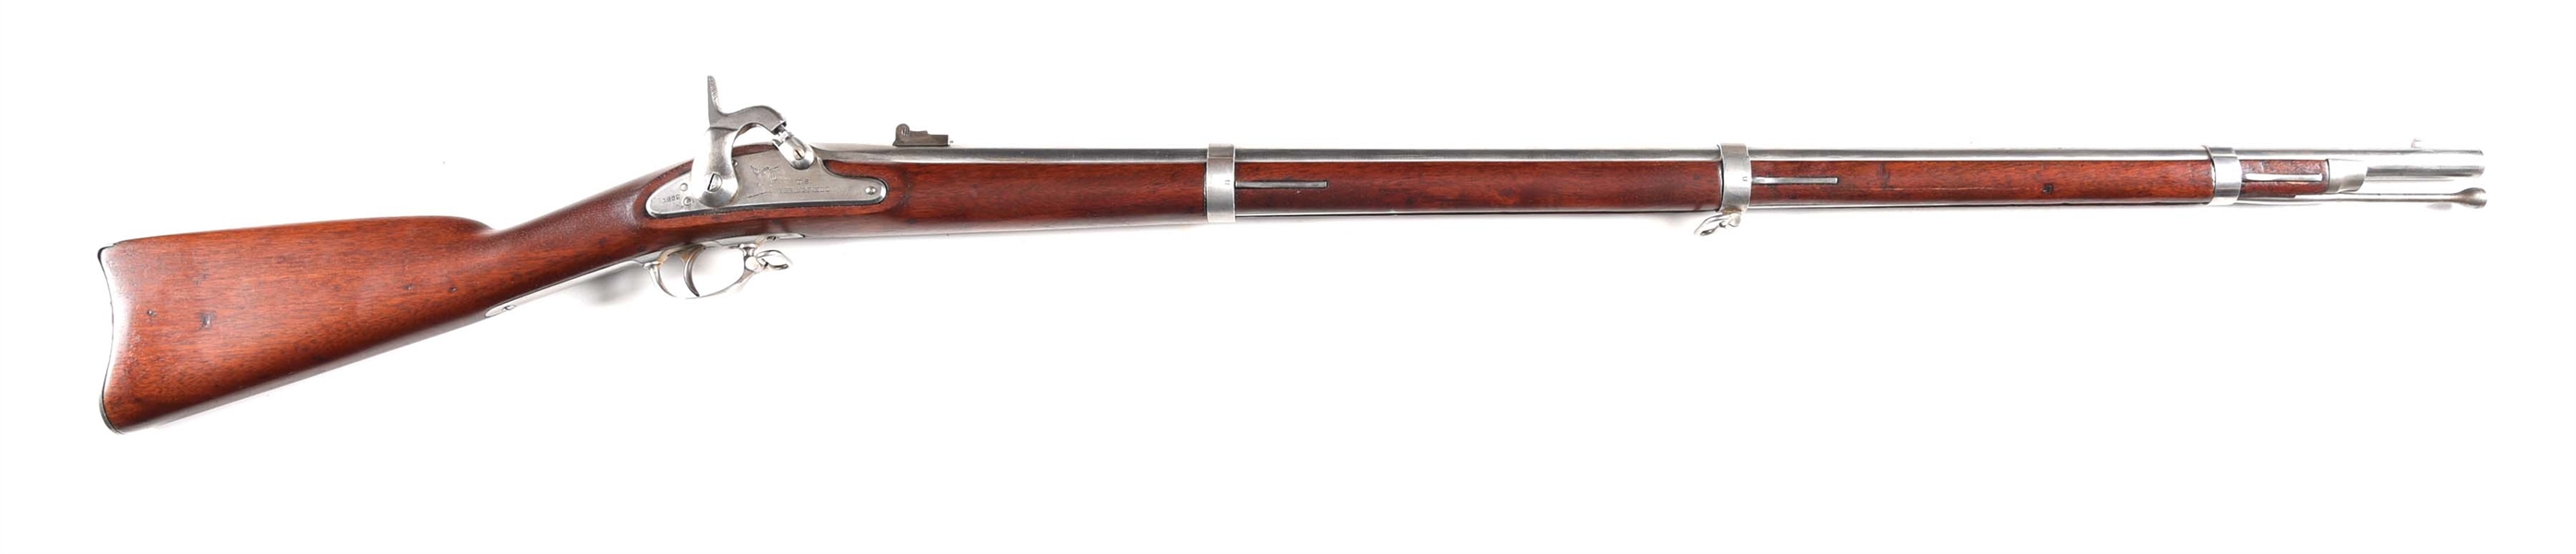 (A) US SPRINGFIELD MODEL 1861 PERCUSSION RIFLED MUSKET DATED 1862.